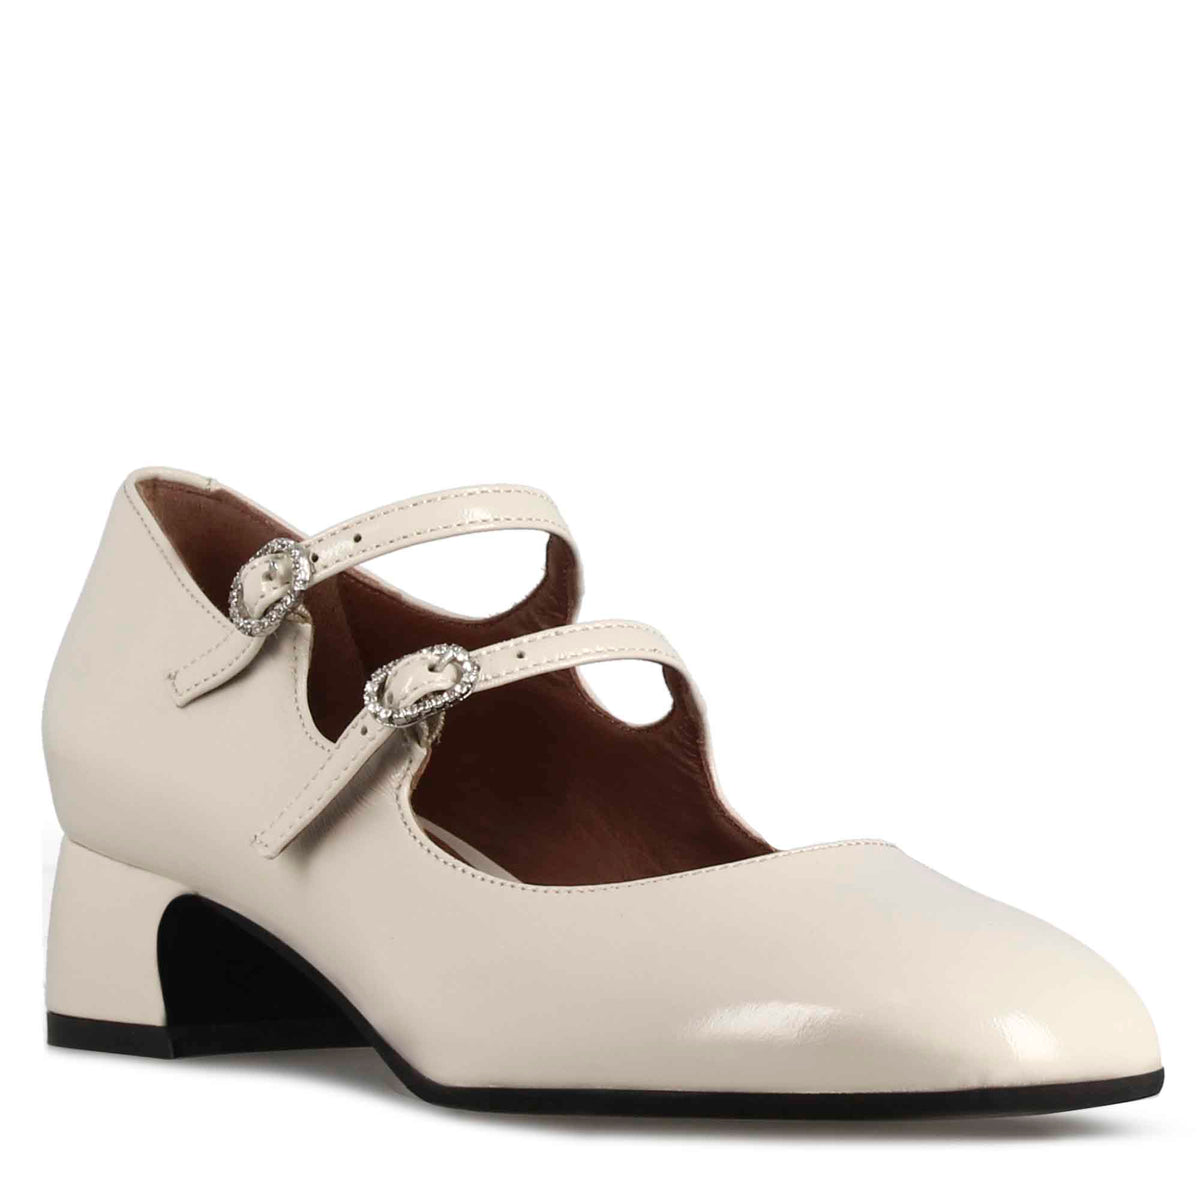 Mary Jane décolleté in beige patent leather